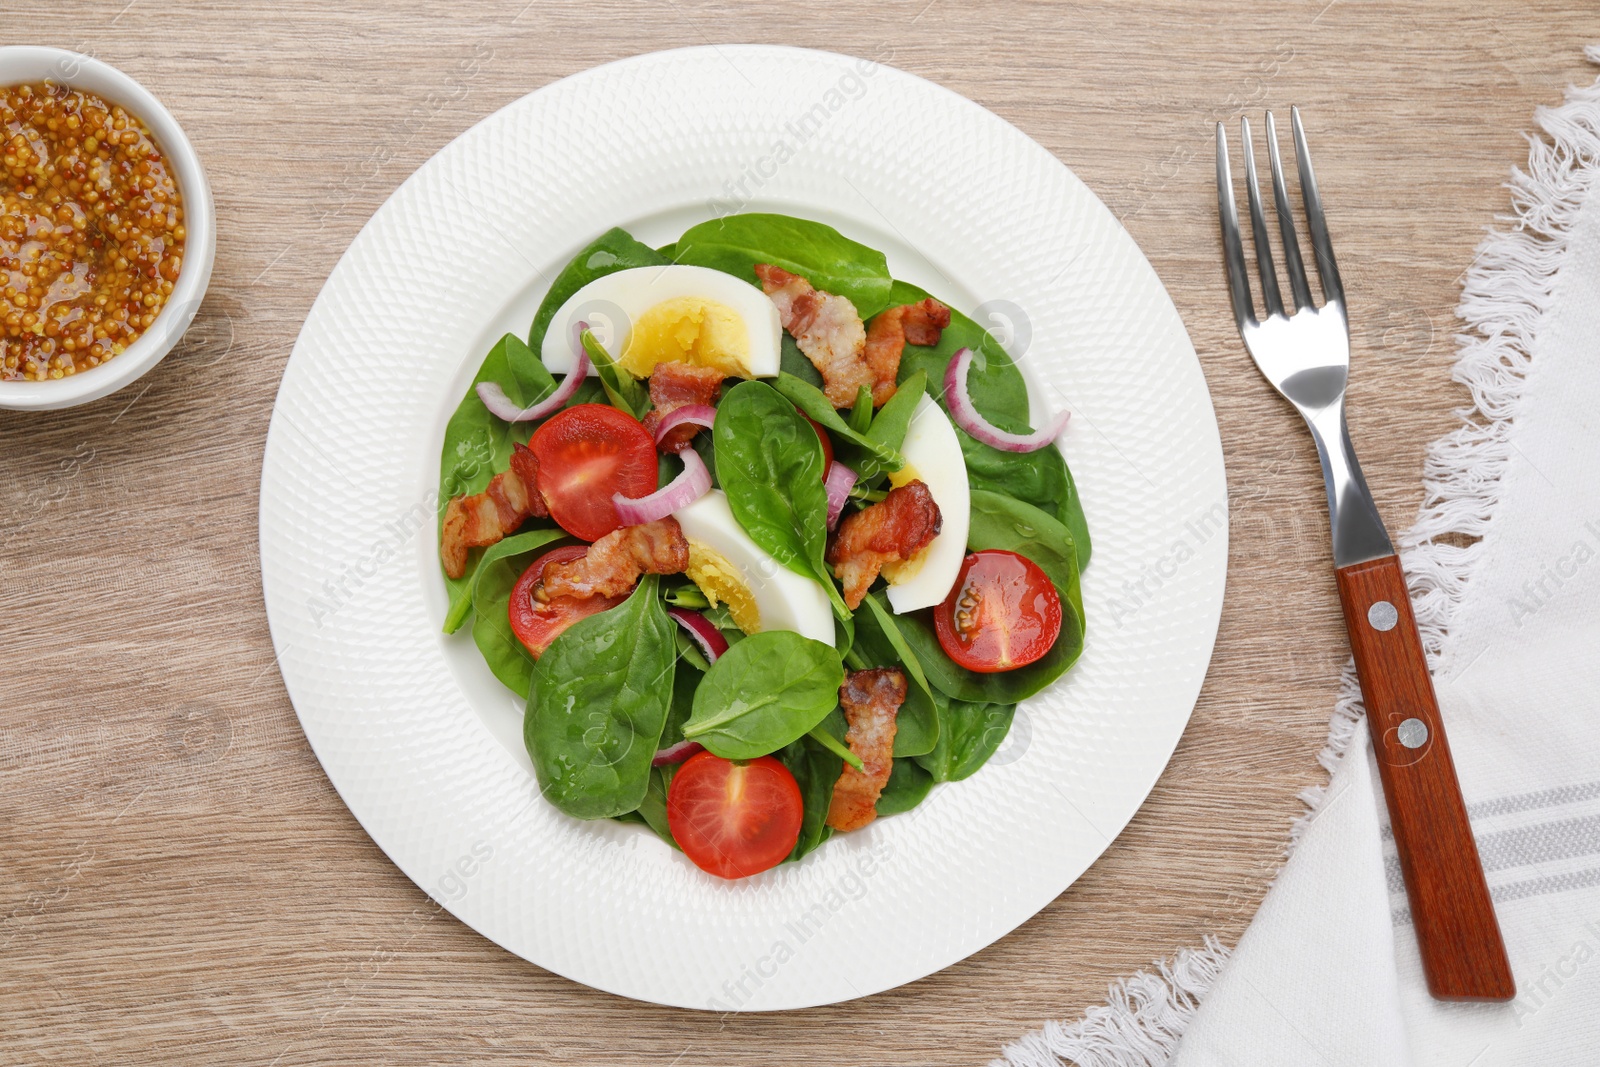 Photo of Delicious salad with boiled egg, bacon and vegetables served on wooden table, flat lay